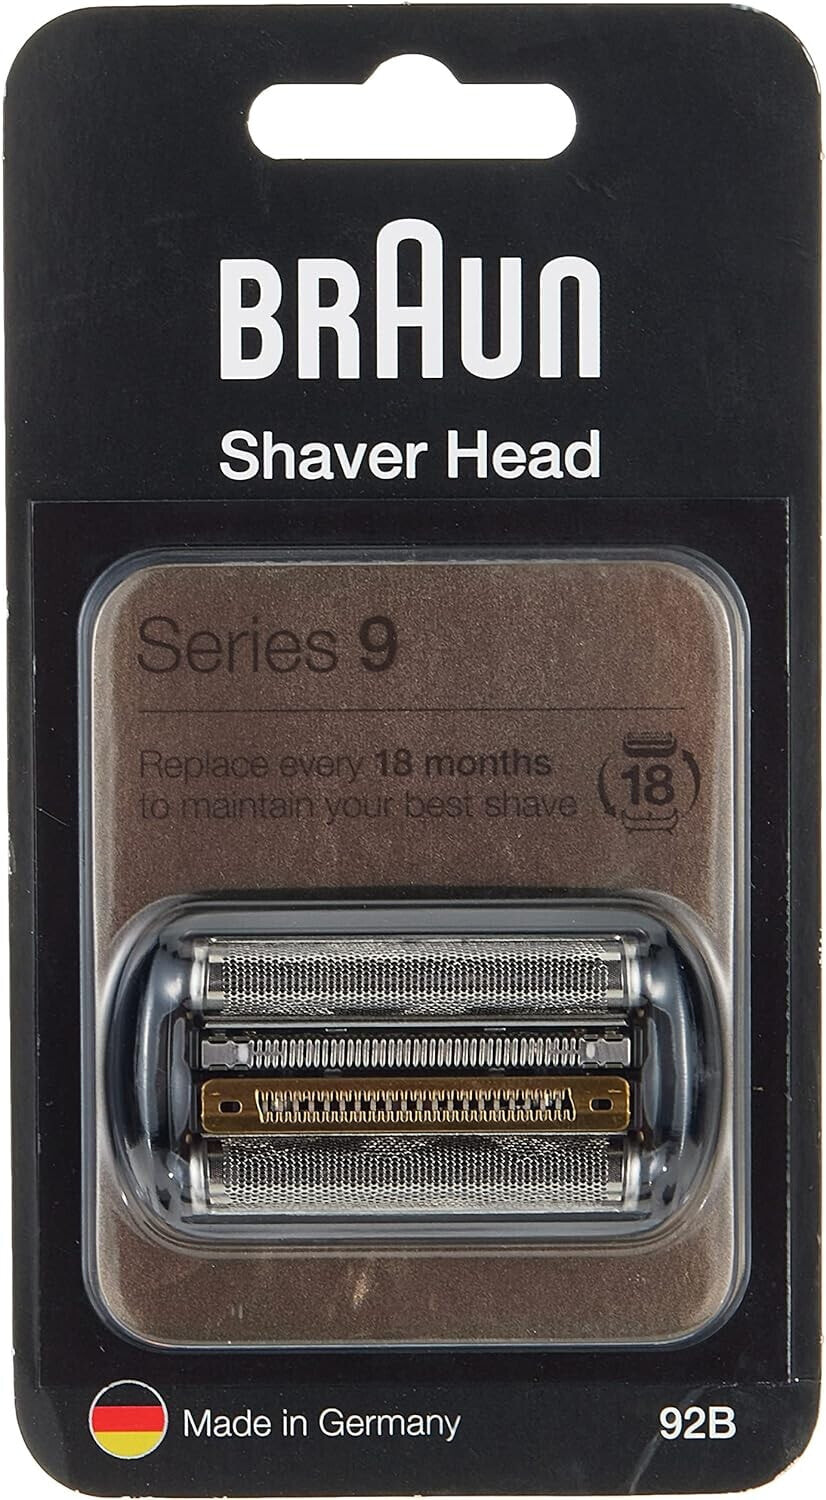 Braun 92B Replacement Shavers for Electric Shavers Compatible with Series 9 Shavers, Black